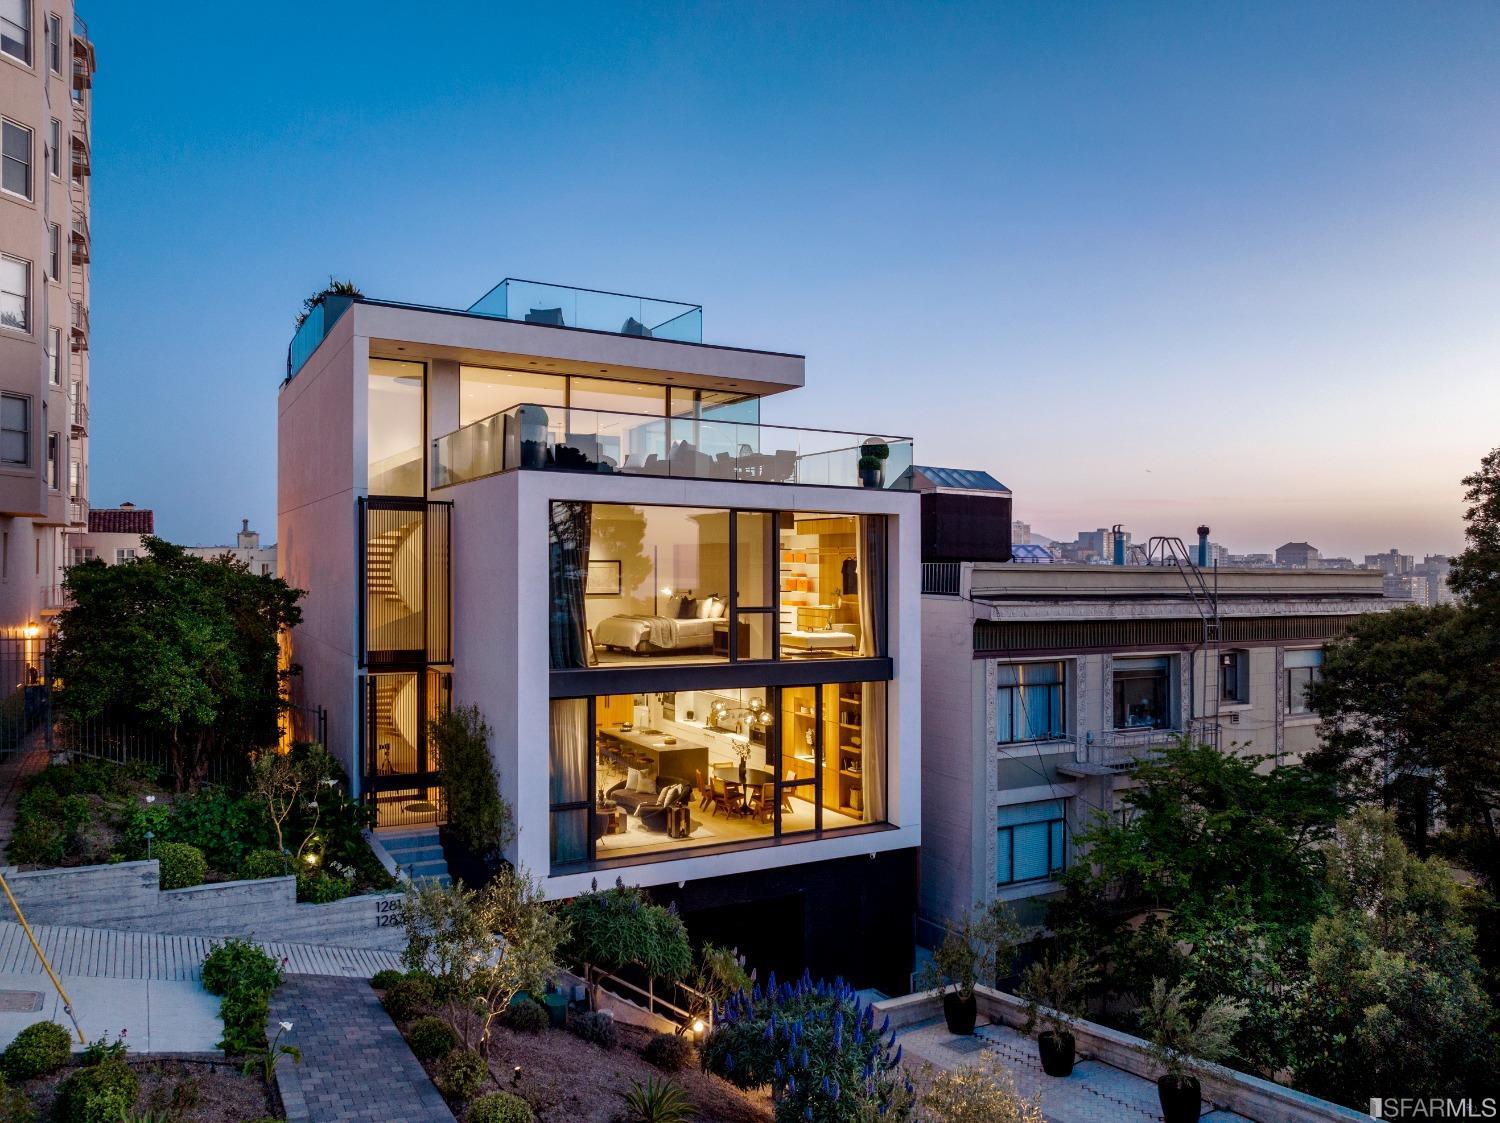 Russian Hill’s Great Designer Non-Home Finally Reality, Asks Very Real $21 Million